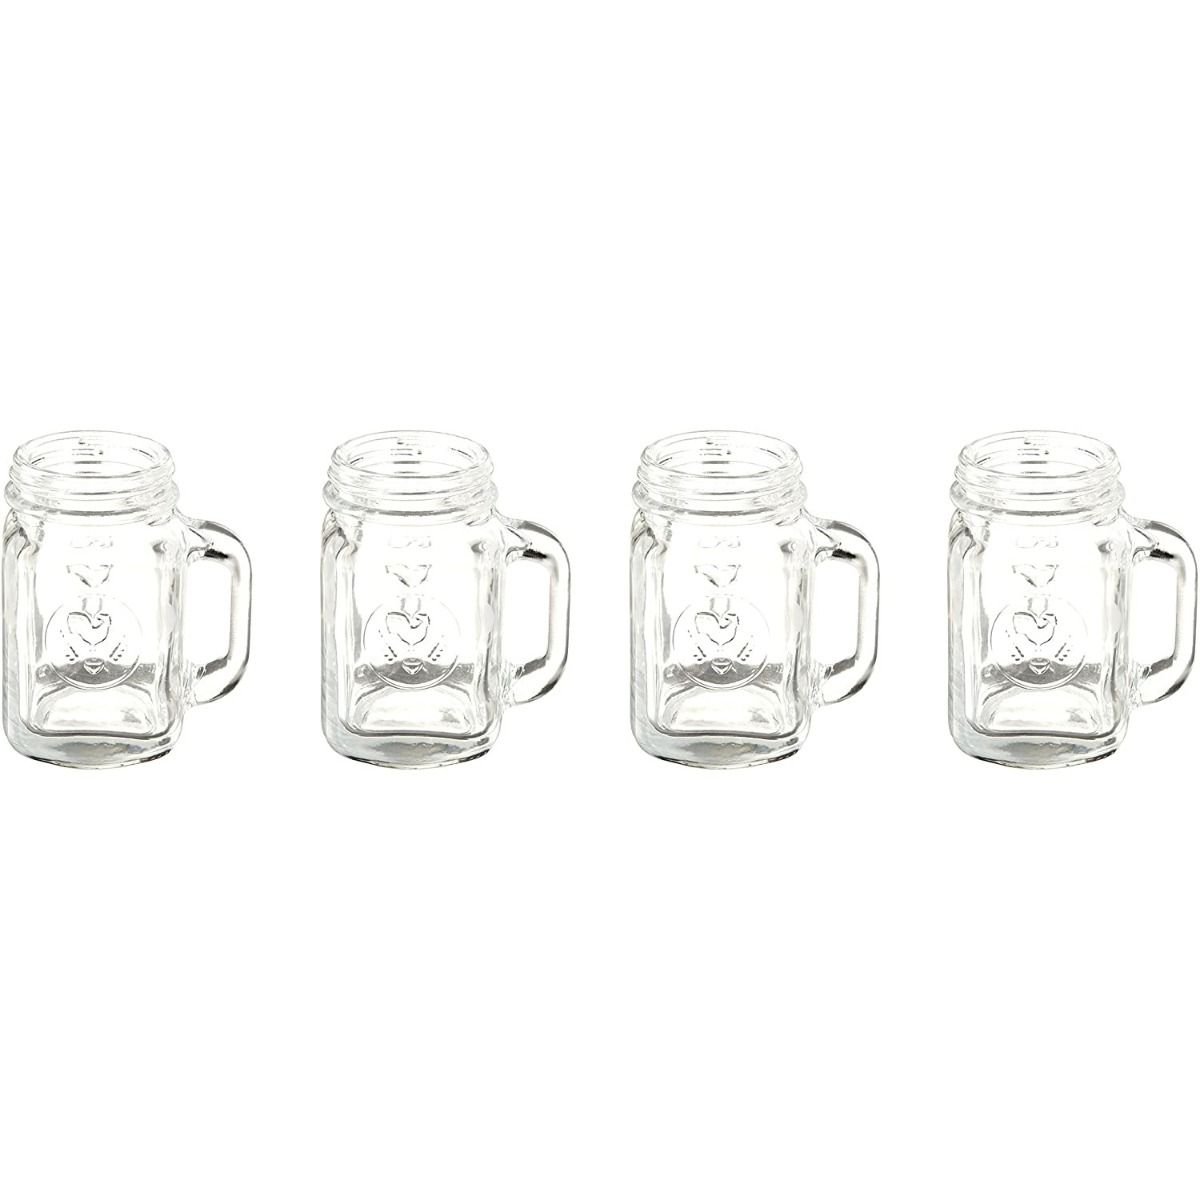 4pc Kikkerland Camping Stainless Steel Shot Glass 1oz Metal Glasses Leather Case